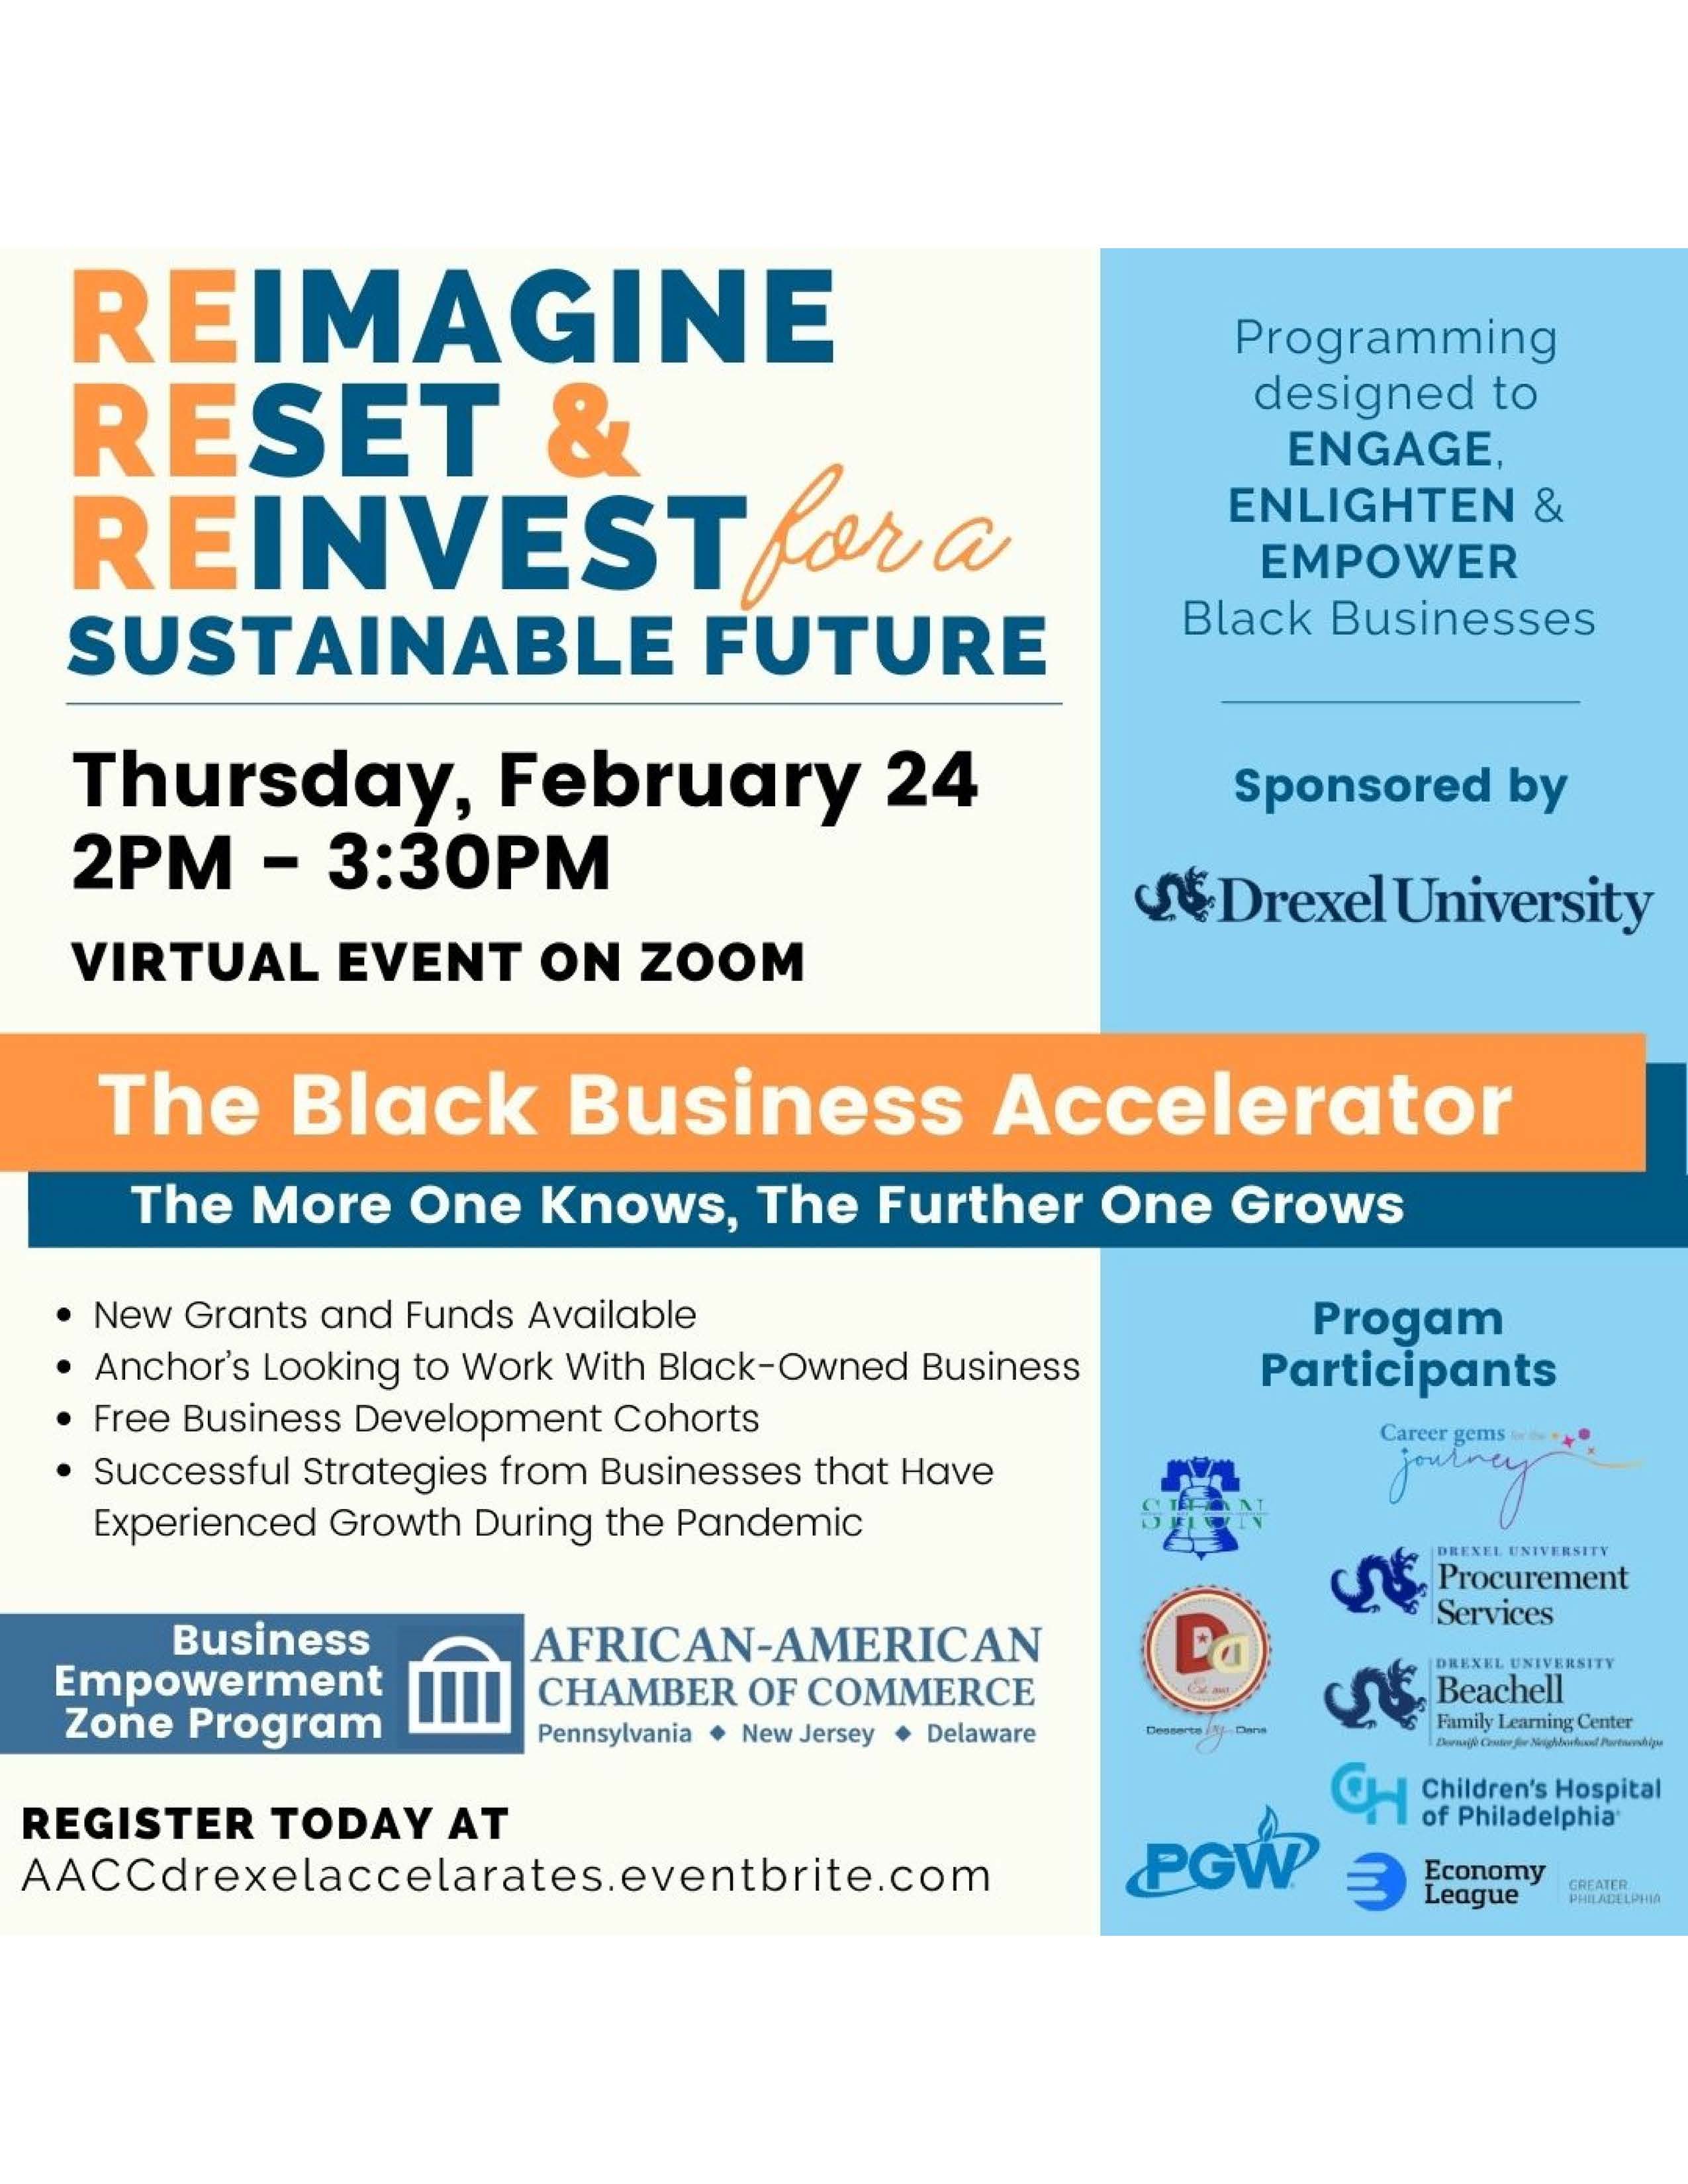 The Black Business Accelerator Event Flyer